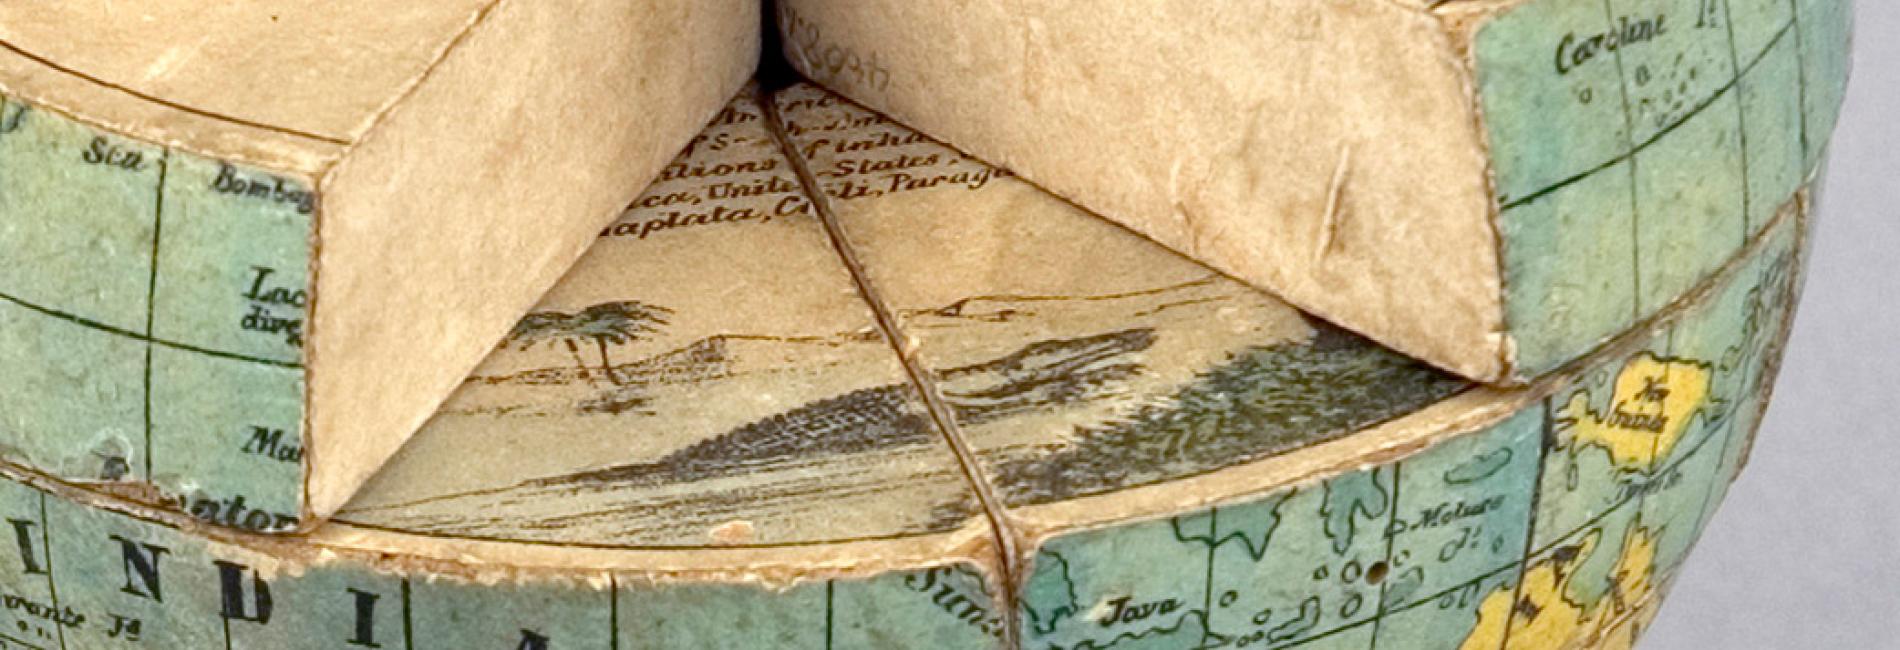 Close up of a jigsaw puzzle globe from the Whipple Museum of the History of Science